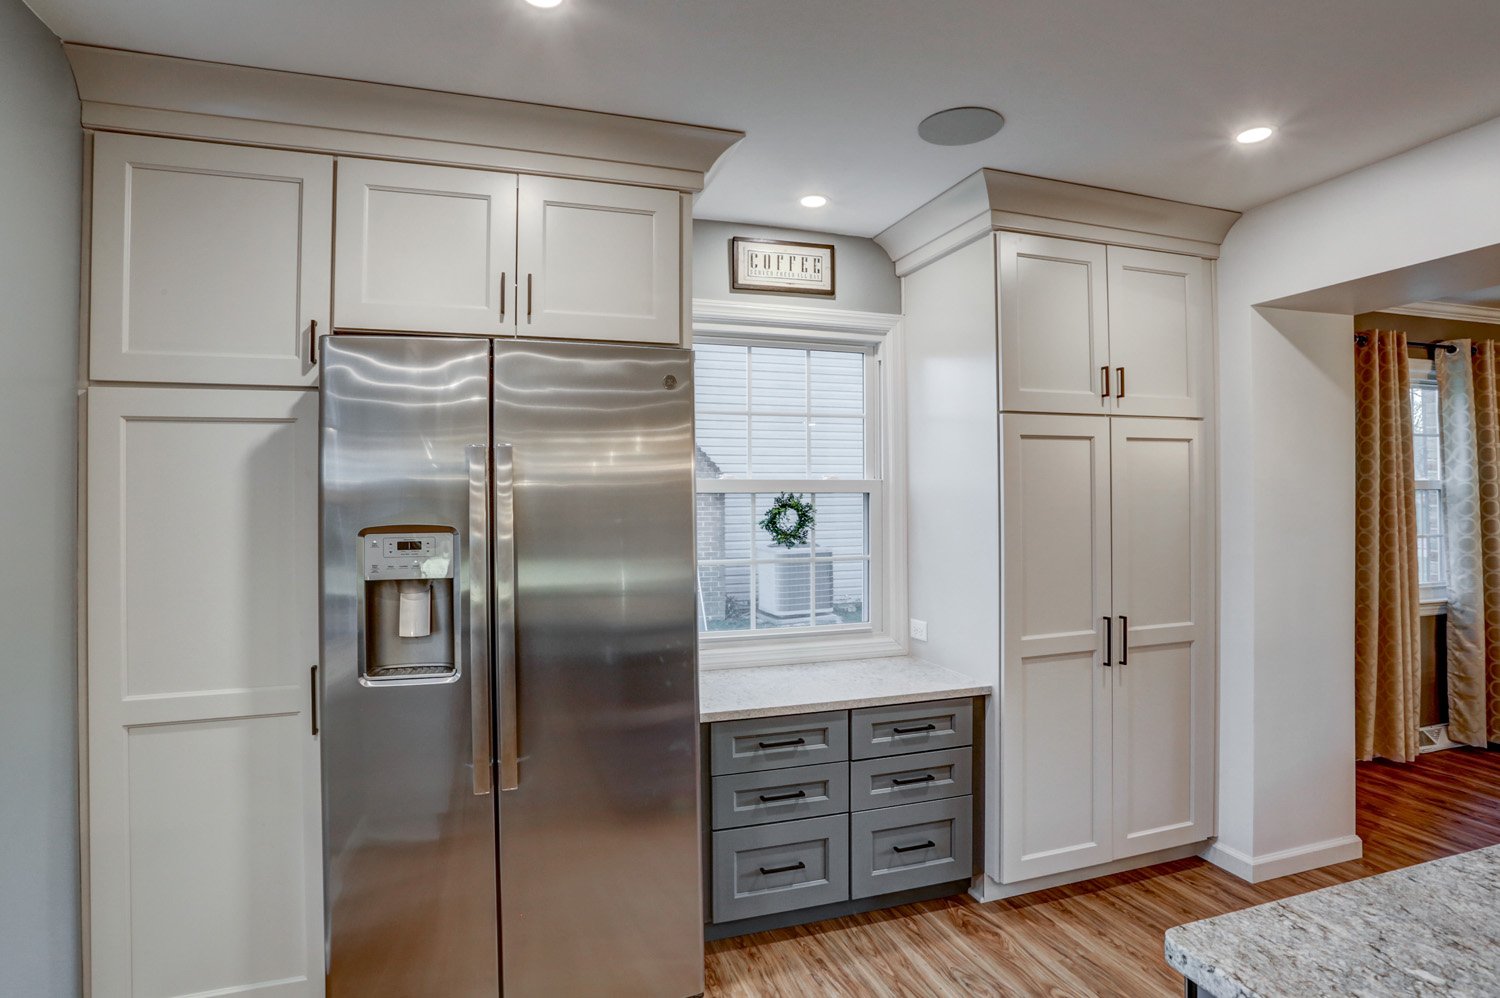 Floor to Ceiling cabinets and stainless steel refrigerator in Manheim Township Kitchen Remodel